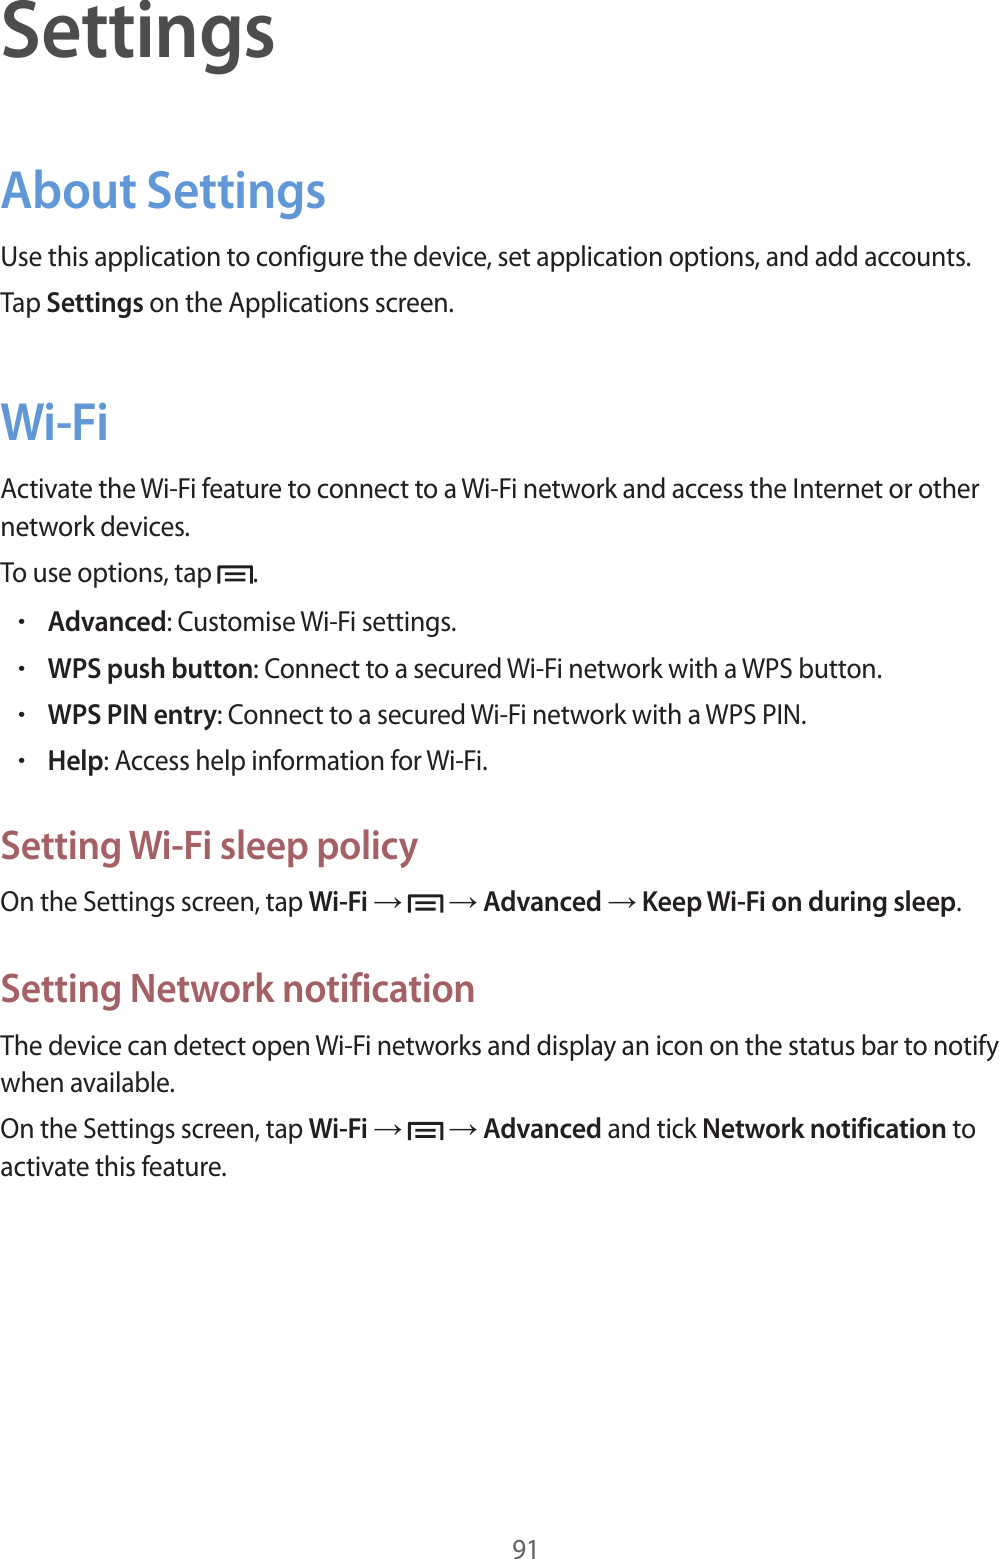 91SettingsAbout SettingsUse this application to configure the device, set application options, and add accounts.Tap Settings on the Applications screen.Wi-FiActivate the Wi-Fi feature to connect to a Wi-Fi network and access the Internet or other network devices.To use options, tap  .•Advanced: Customise Wi-Fi settings.•WPS push button: Connect to a secured Wi-Fi network with a WPS button.•WPS PIN entry: Connect to a secured Wi-Fi network with a WPS PIN.•Help: Access help information for Wi-Fi.Setting Wi-Fi sleep policyOn the Settings screen, tap Wi-Fi →   → Advanced → Keep Wi-Fi on during sleep.Setting Network notificationThe device can detect open Wi-Fi networks and display an icon on the status bar to notify when available.On the Settings screen, tap Wi-Fi →   → Advanced and tick Network notification to activate this feature.